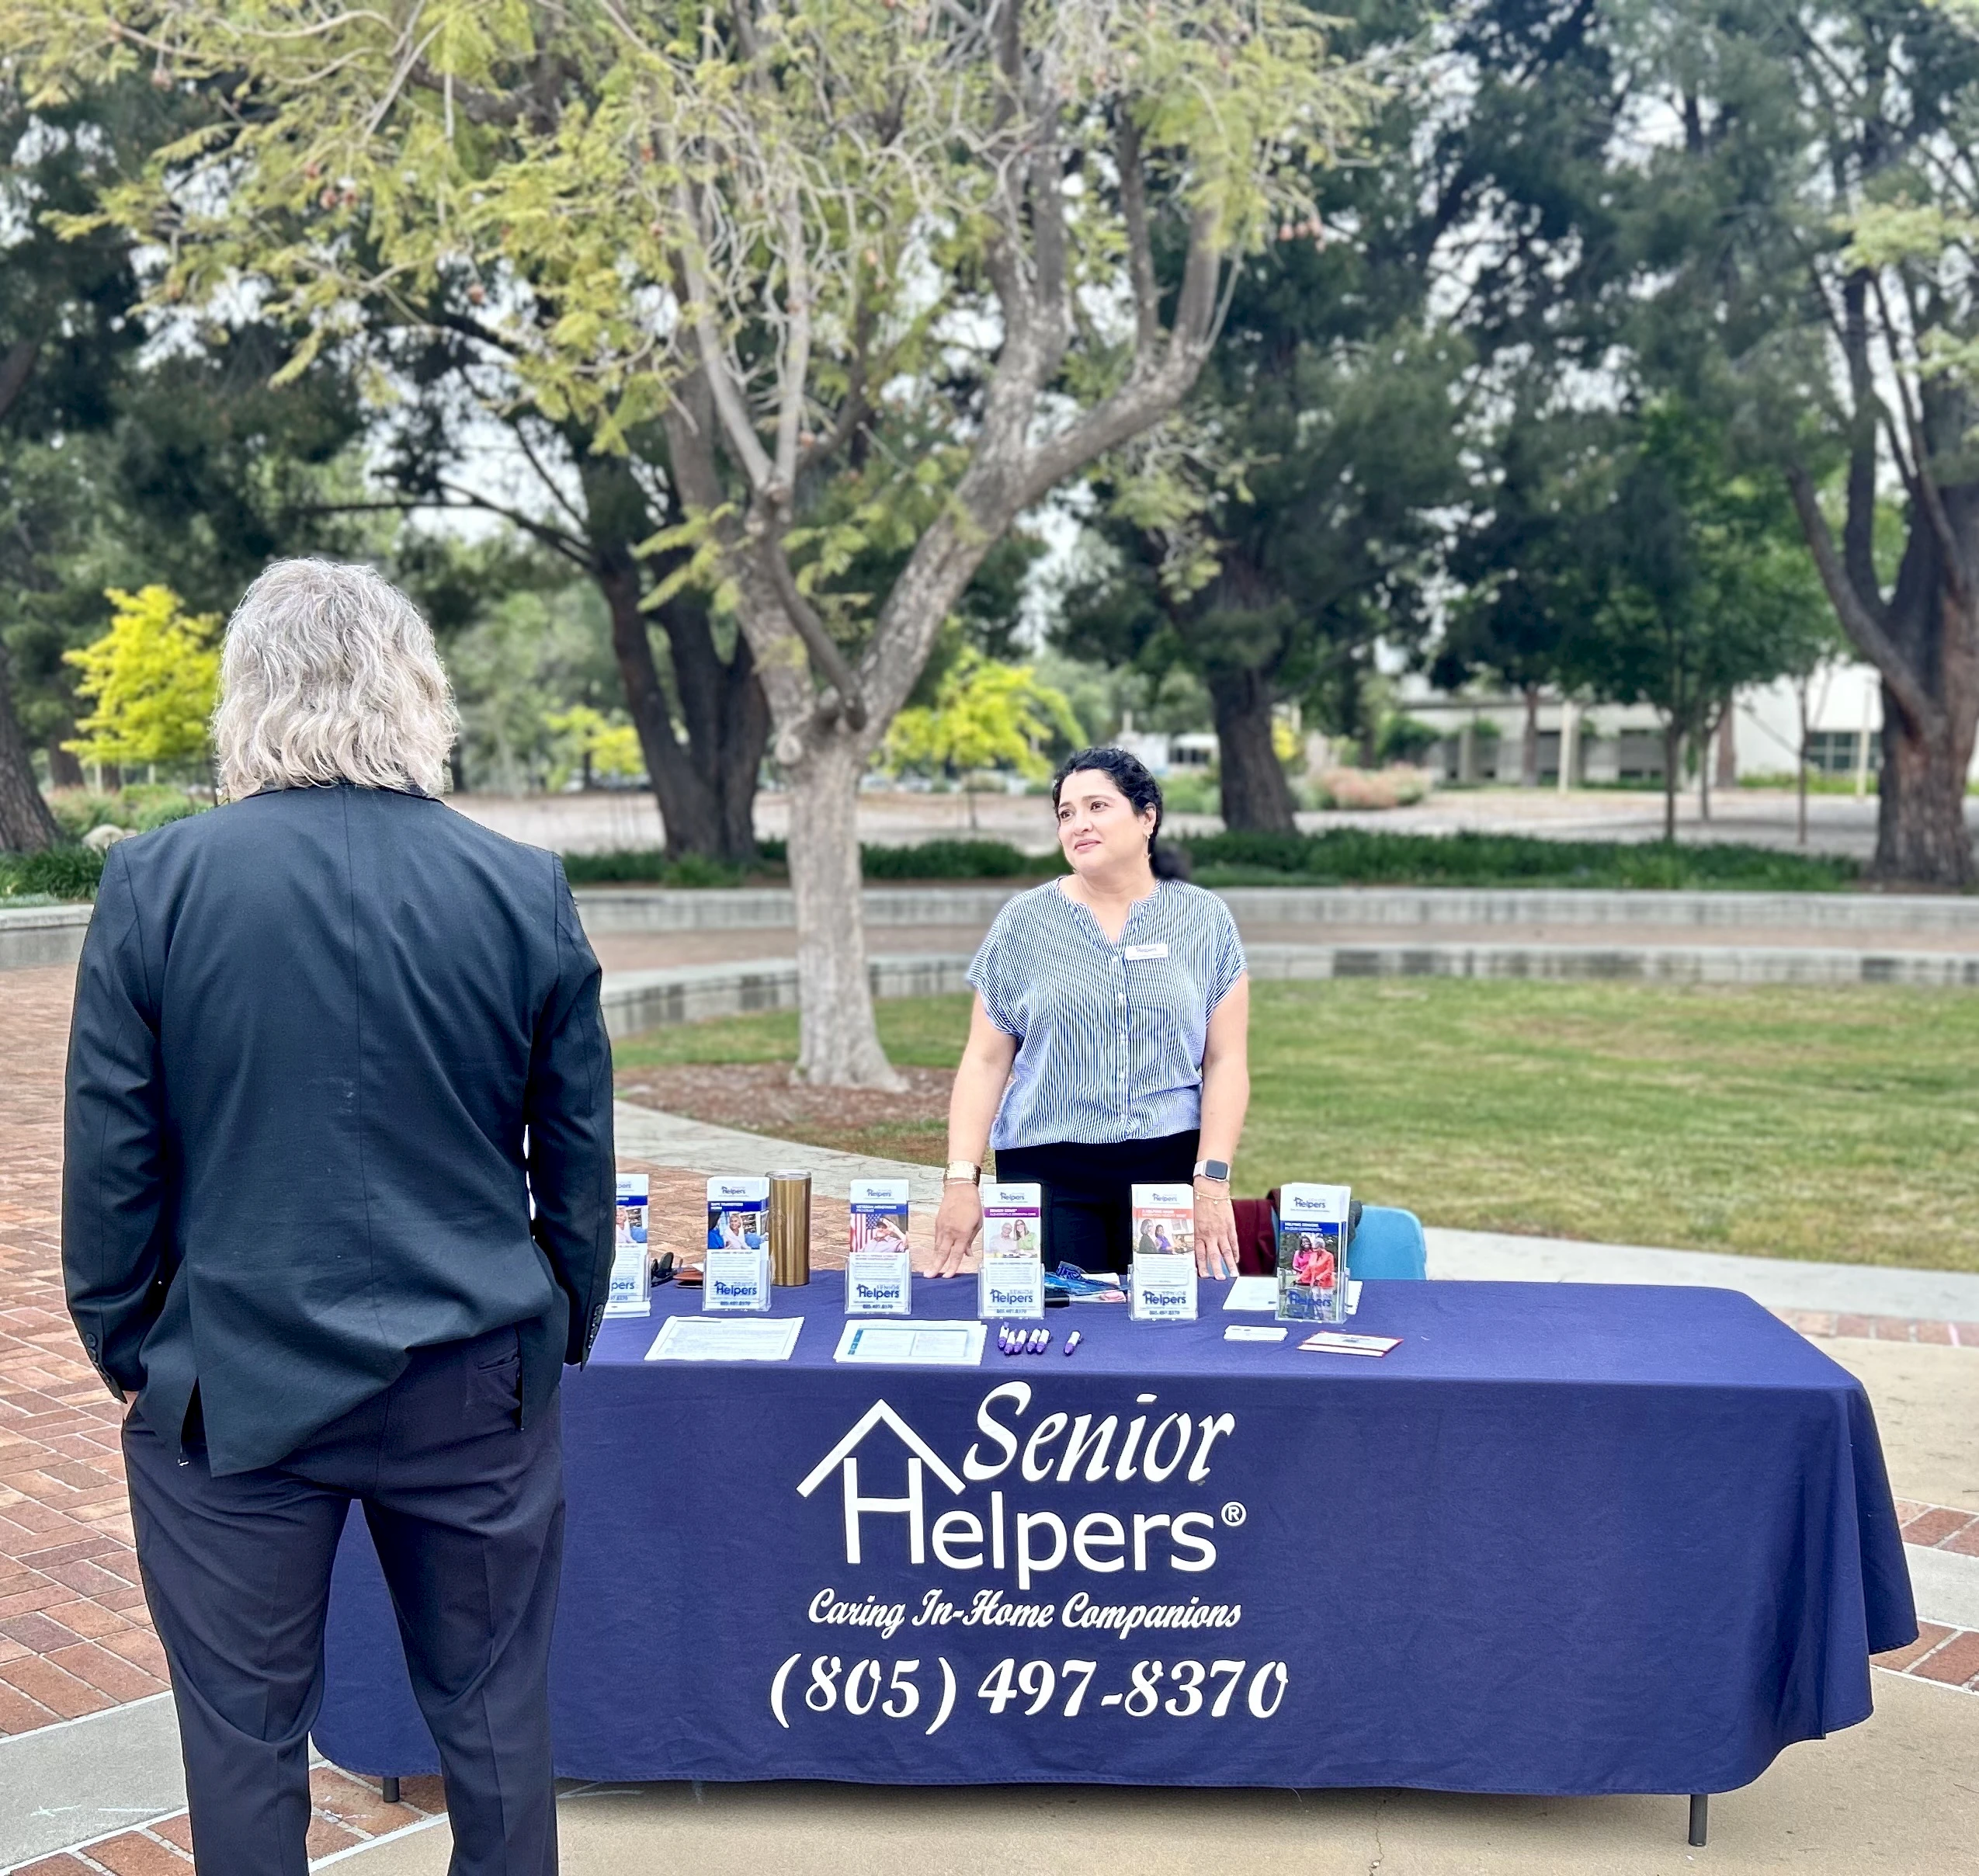 Excellent turnout at the Simi Valley Wellness Fair! Overflowing with informative booths from the senior care industry, it was an enriching experience for all attendees.